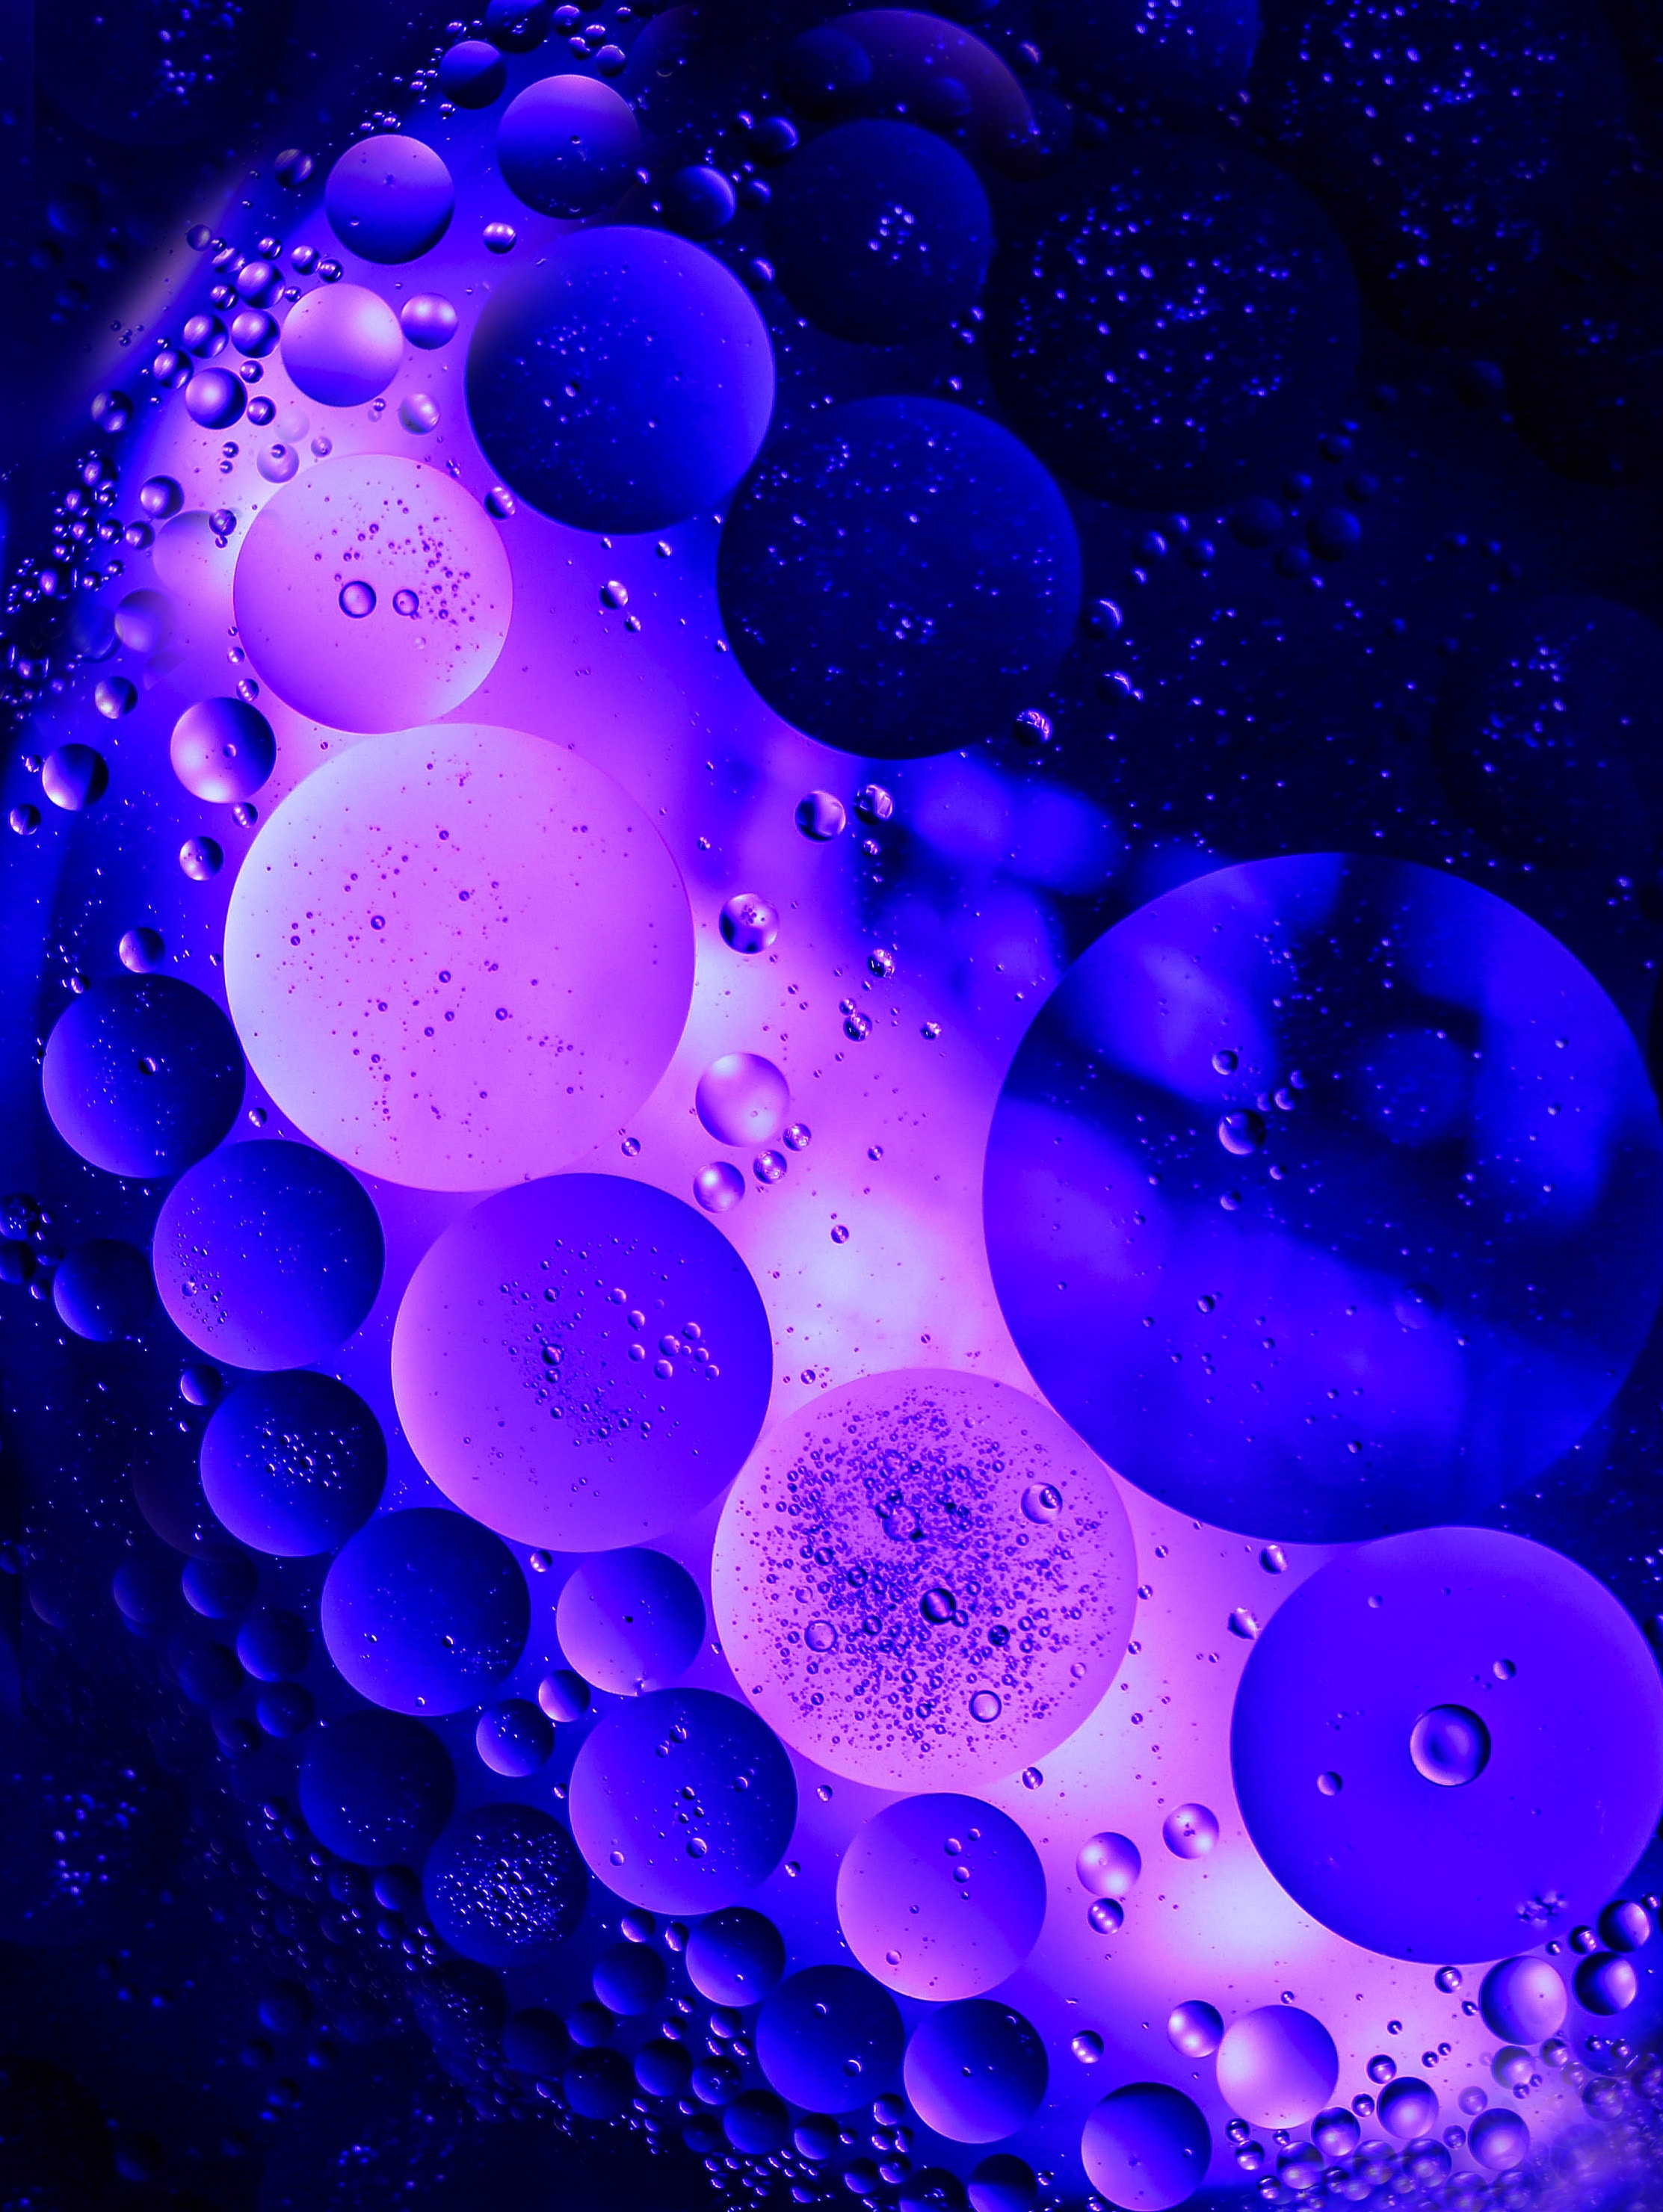 132254 download wallpaper circles, purple, bubbles, violet, macro, dark, form screensavers and pictures for free